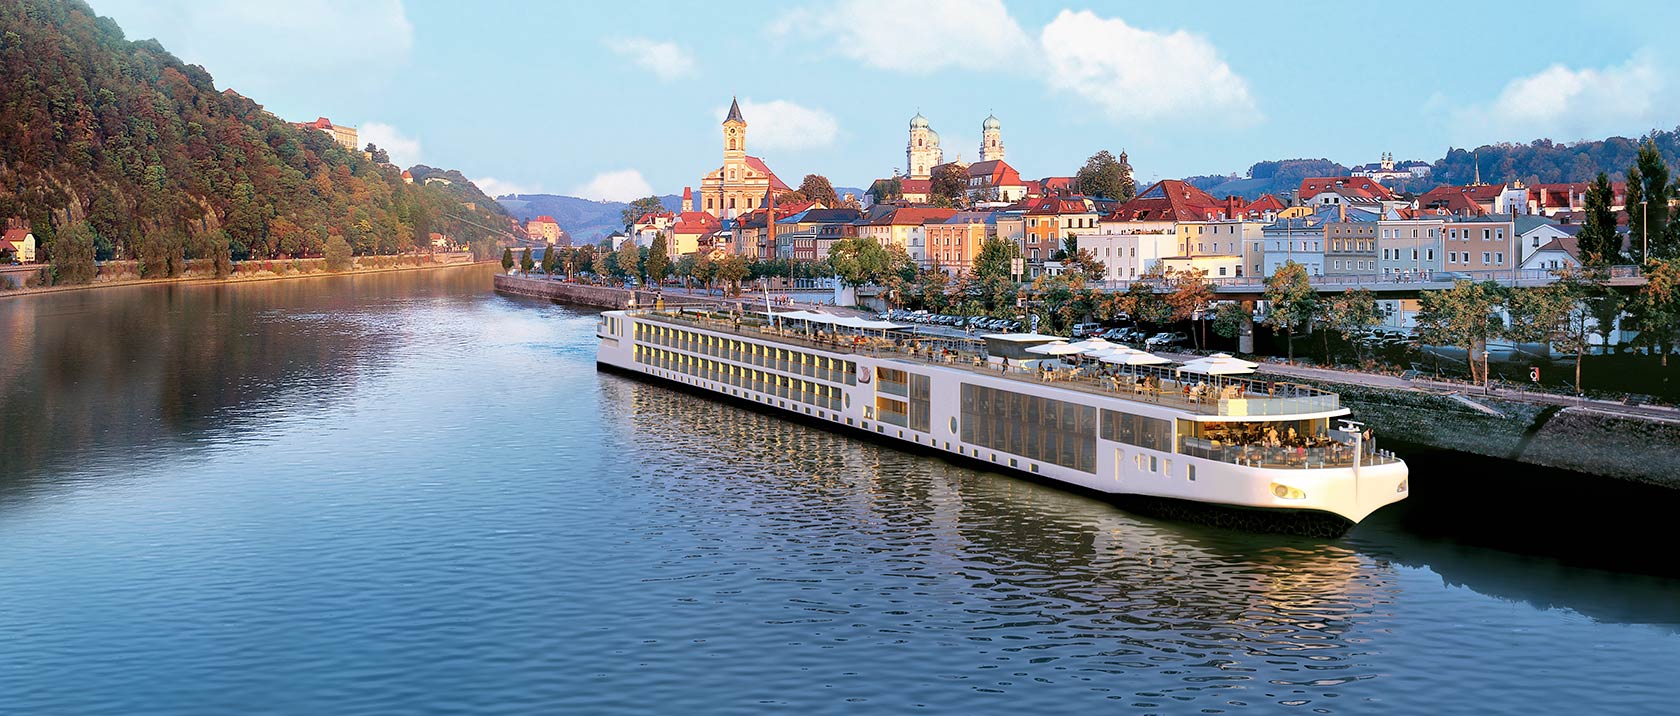 river boat tours germany